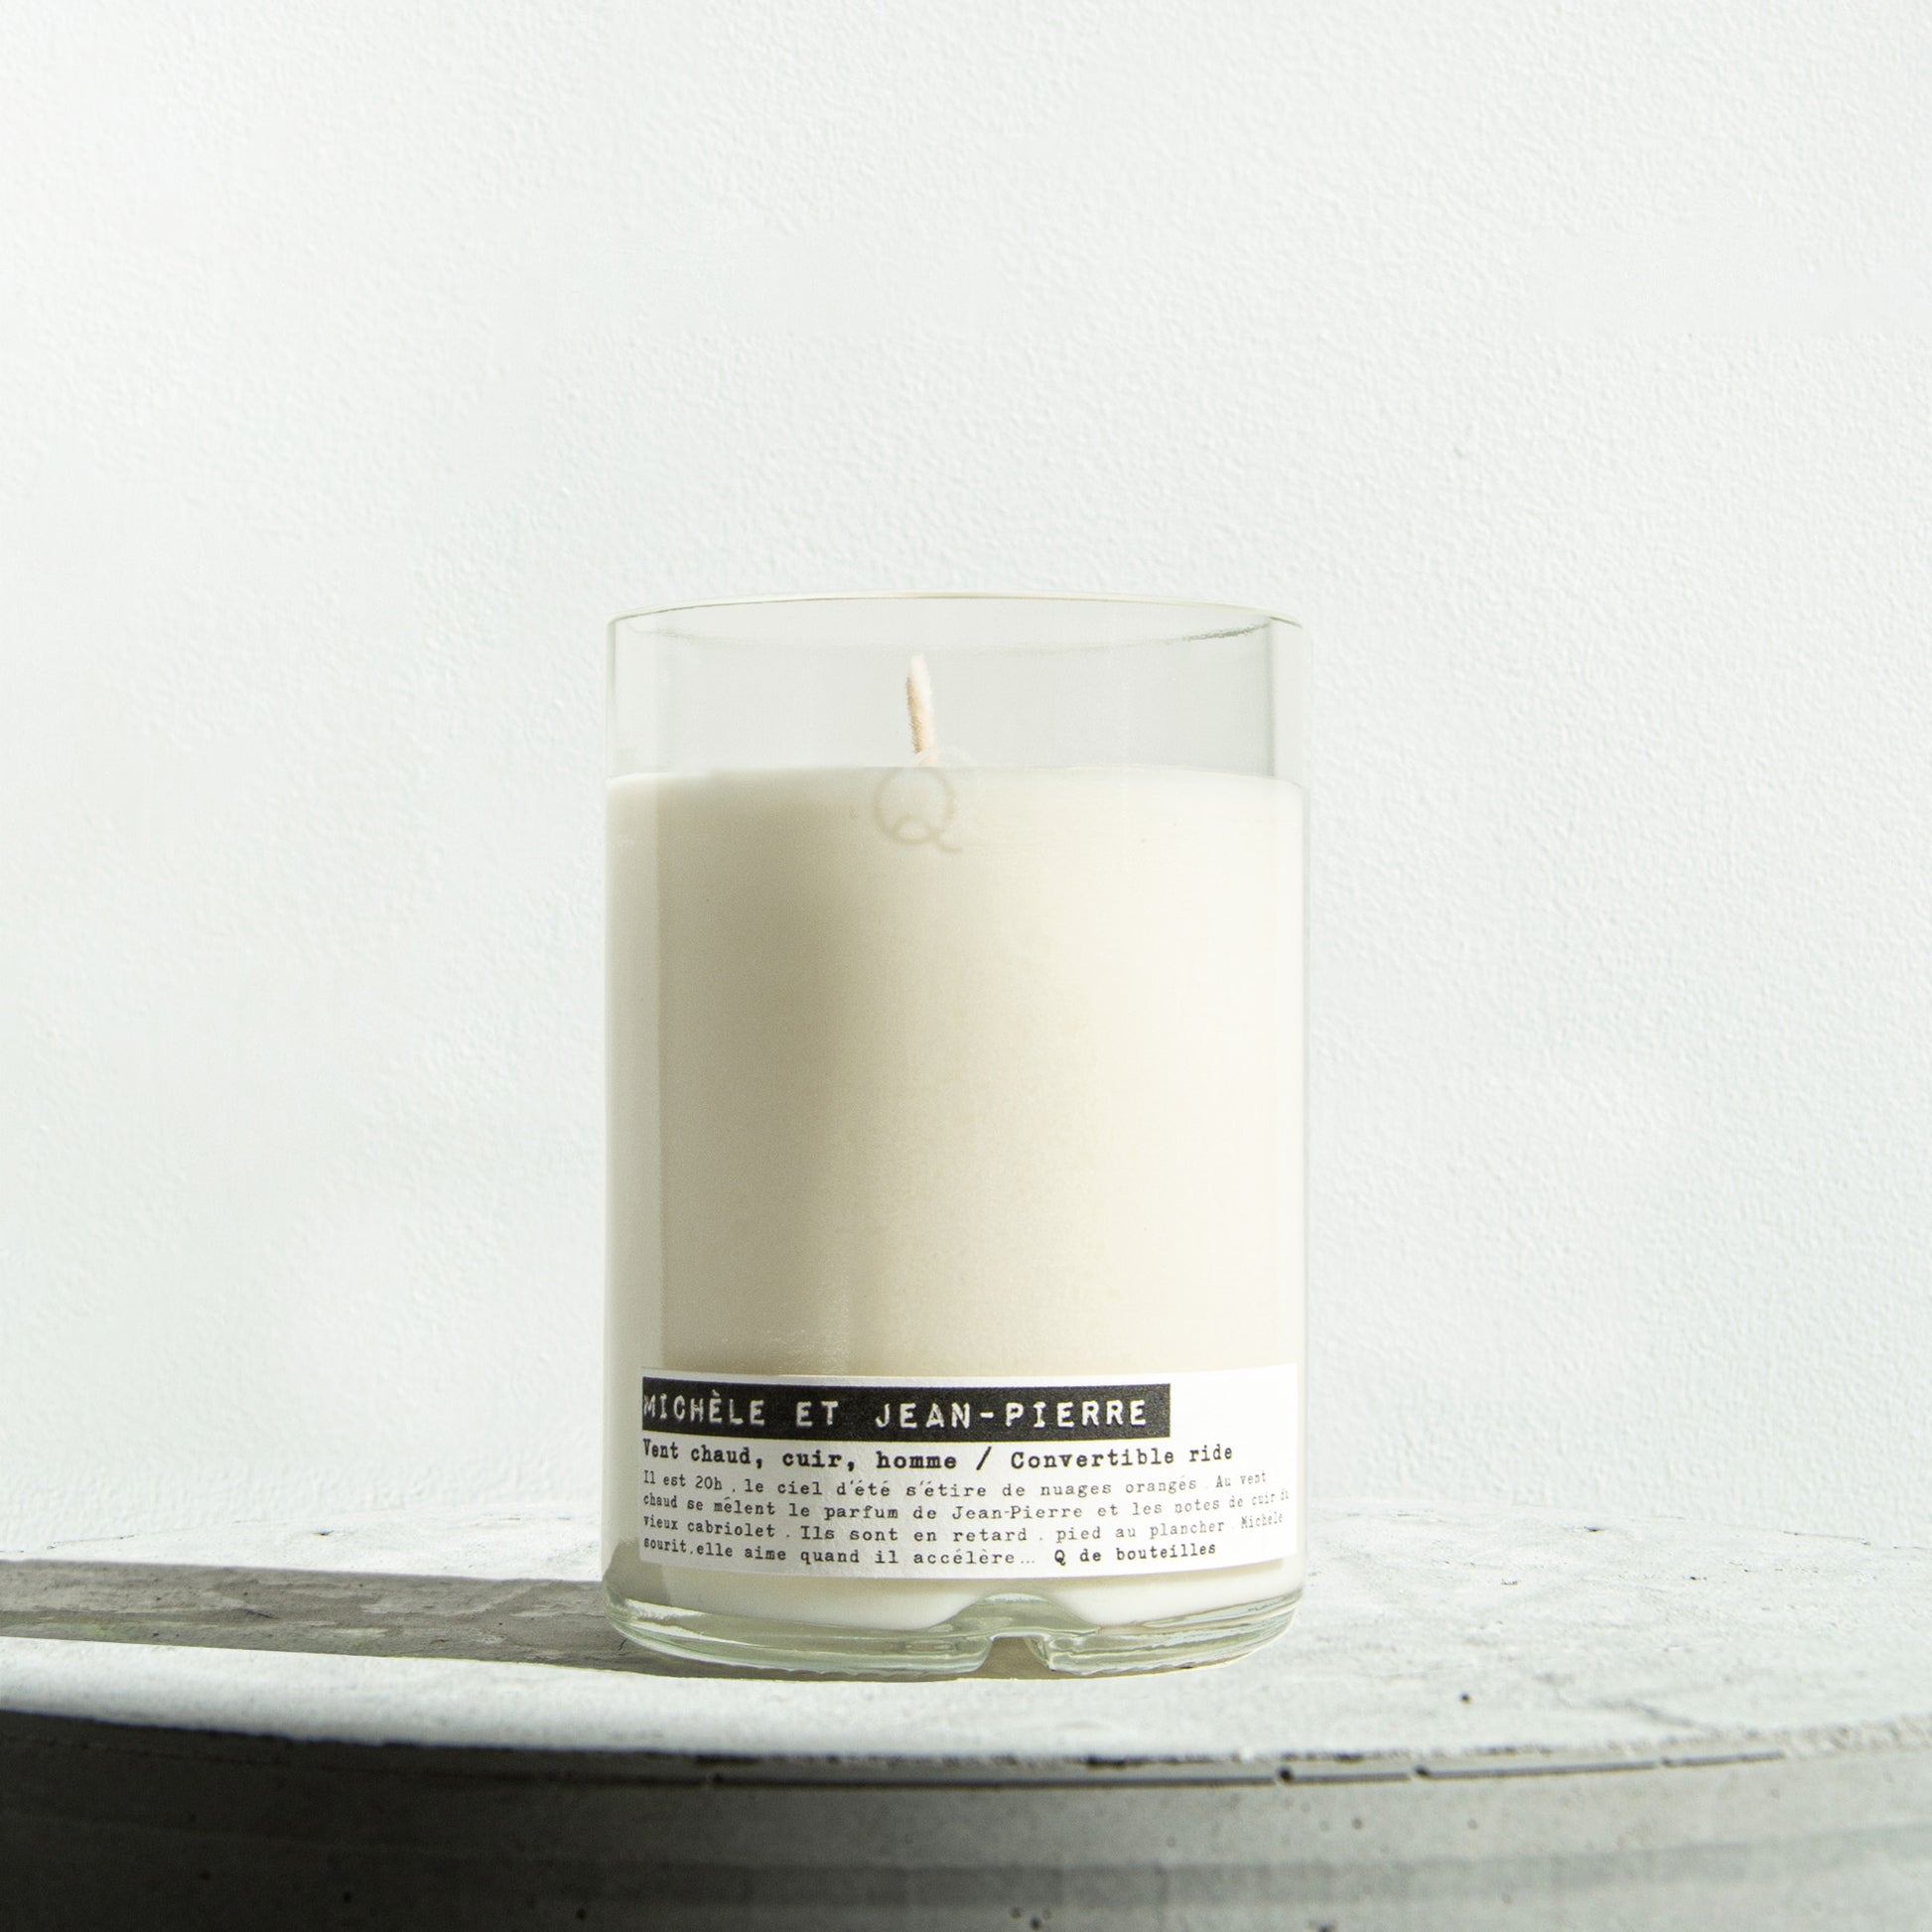 Scented candle - Michèle & Jean-Pierre